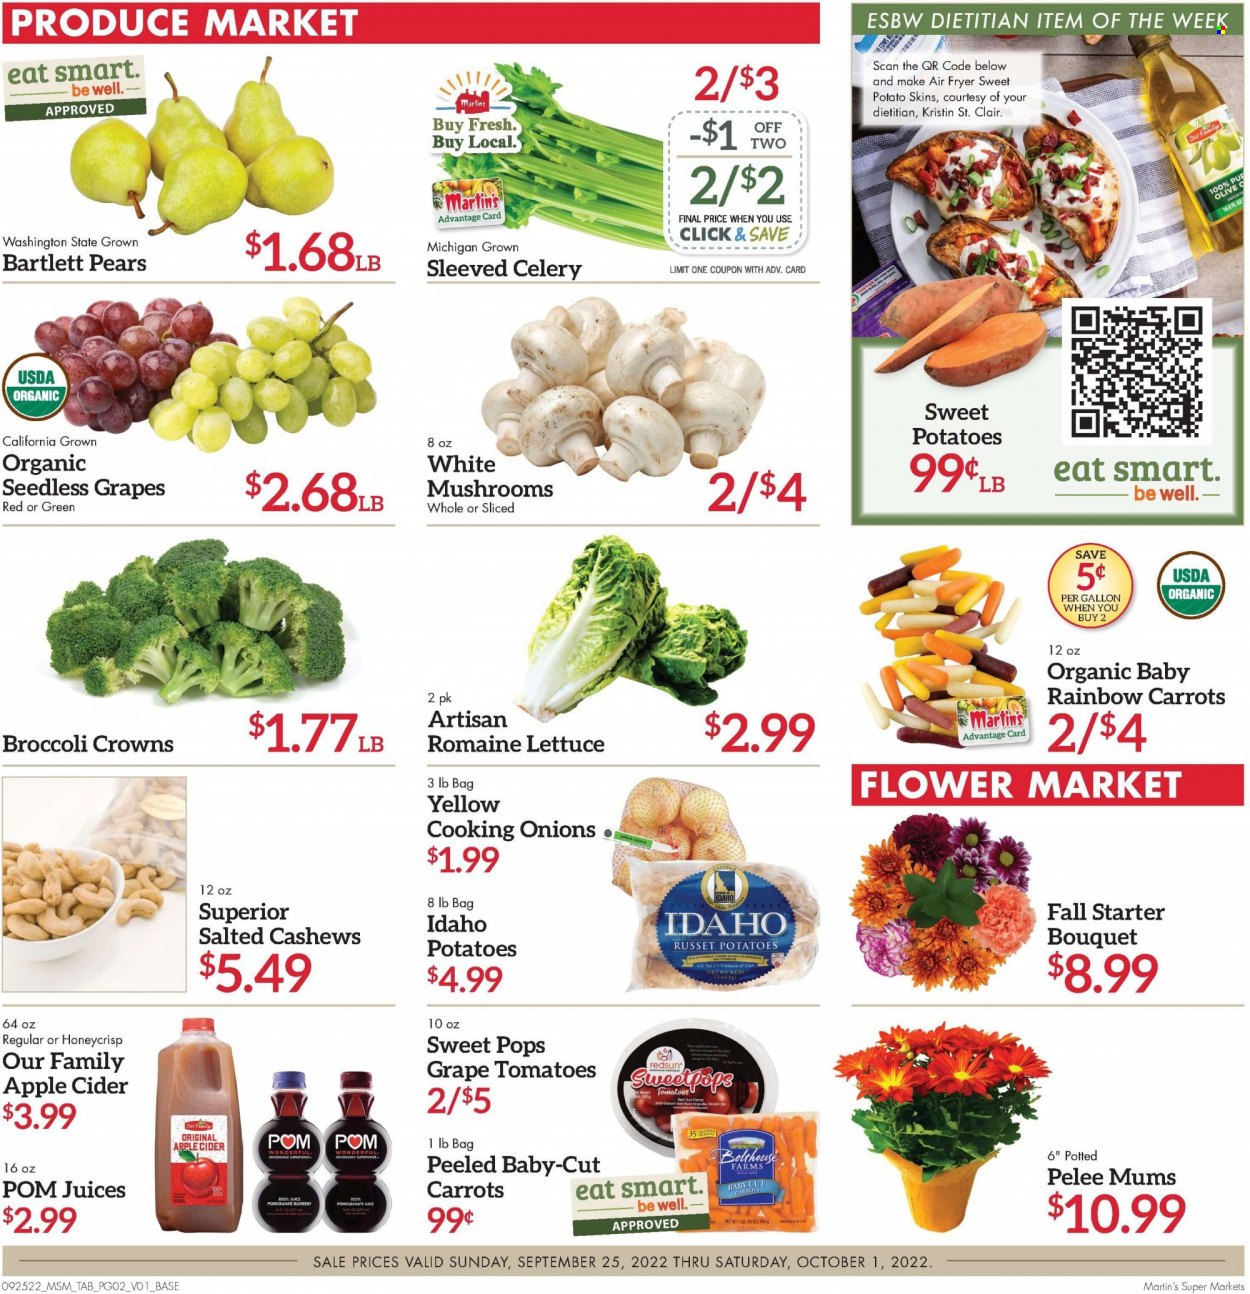 thumbnail - Martin’s Flyer - 09/25/2022 - 10/01/2022 - Sales products - mushrooms, carrots, celery, russet potatoes, sweet potato, tomatoes, potatoes, onion, lettuce, sleeved celery, Bartlett pears, seedless grapes, pears, cashews, juice, apple cider, cider, bouquet, pomegranate. Page 2.